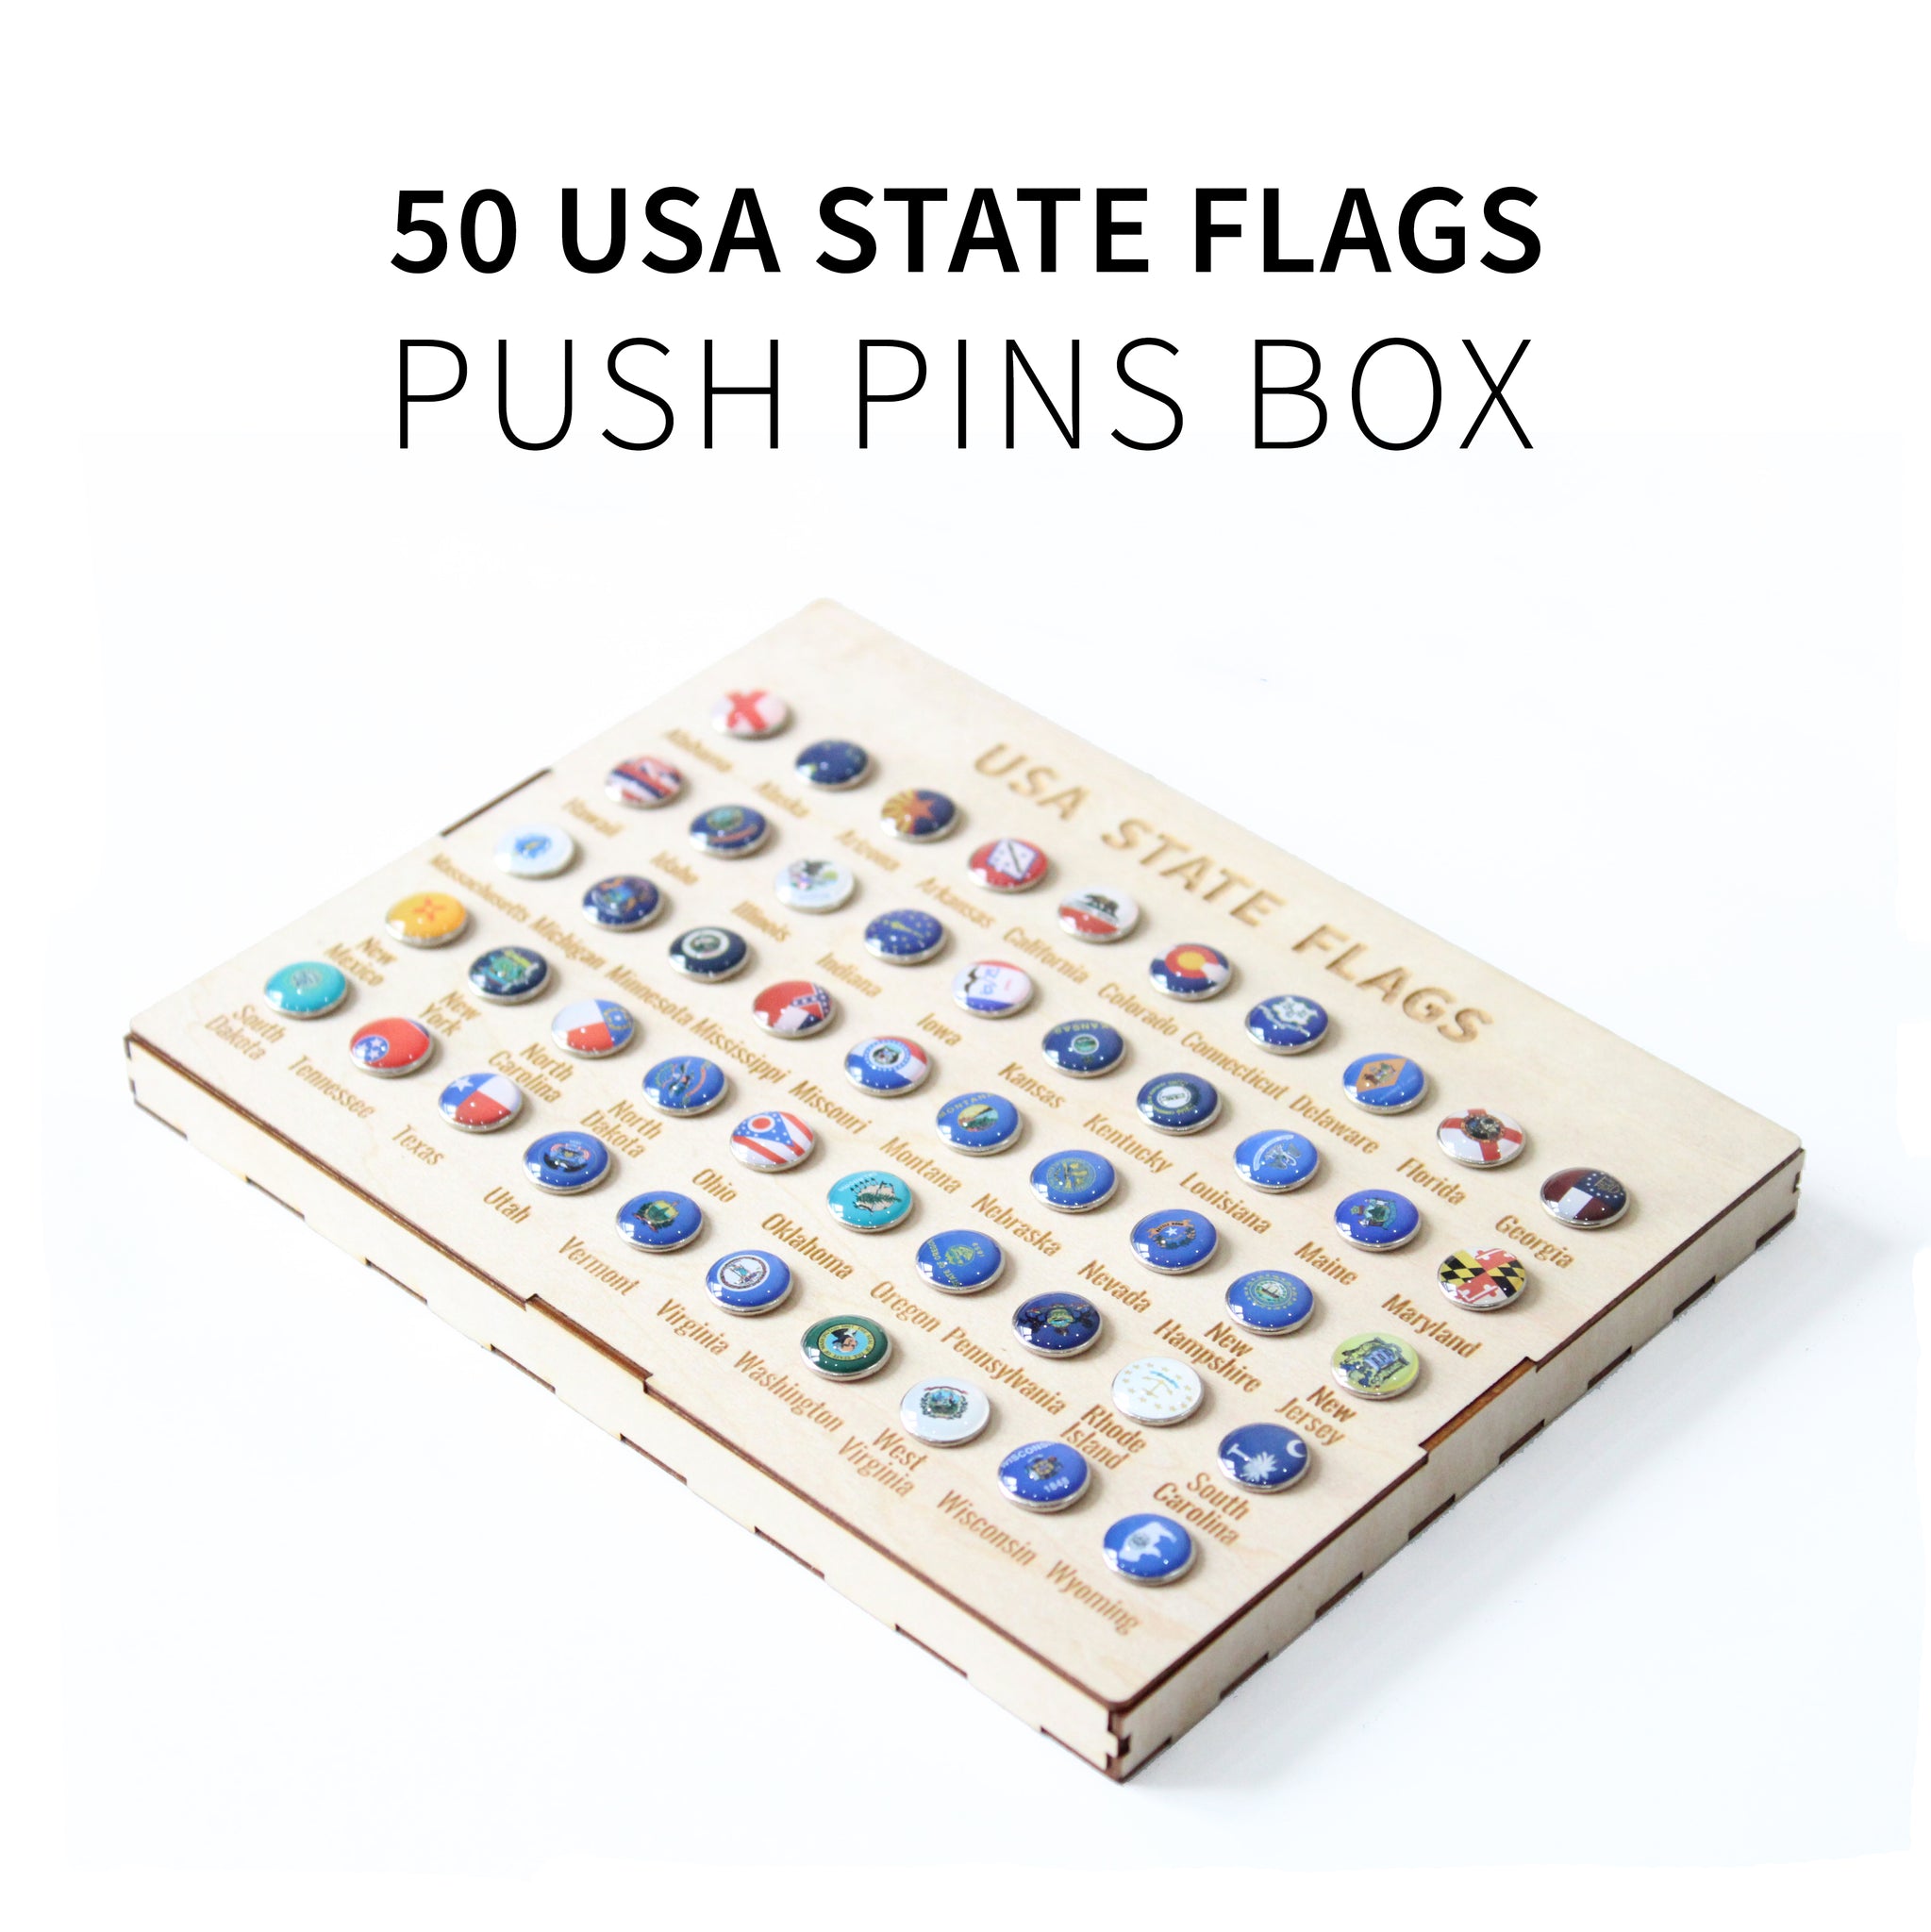 50 USA State Flags Push Pins